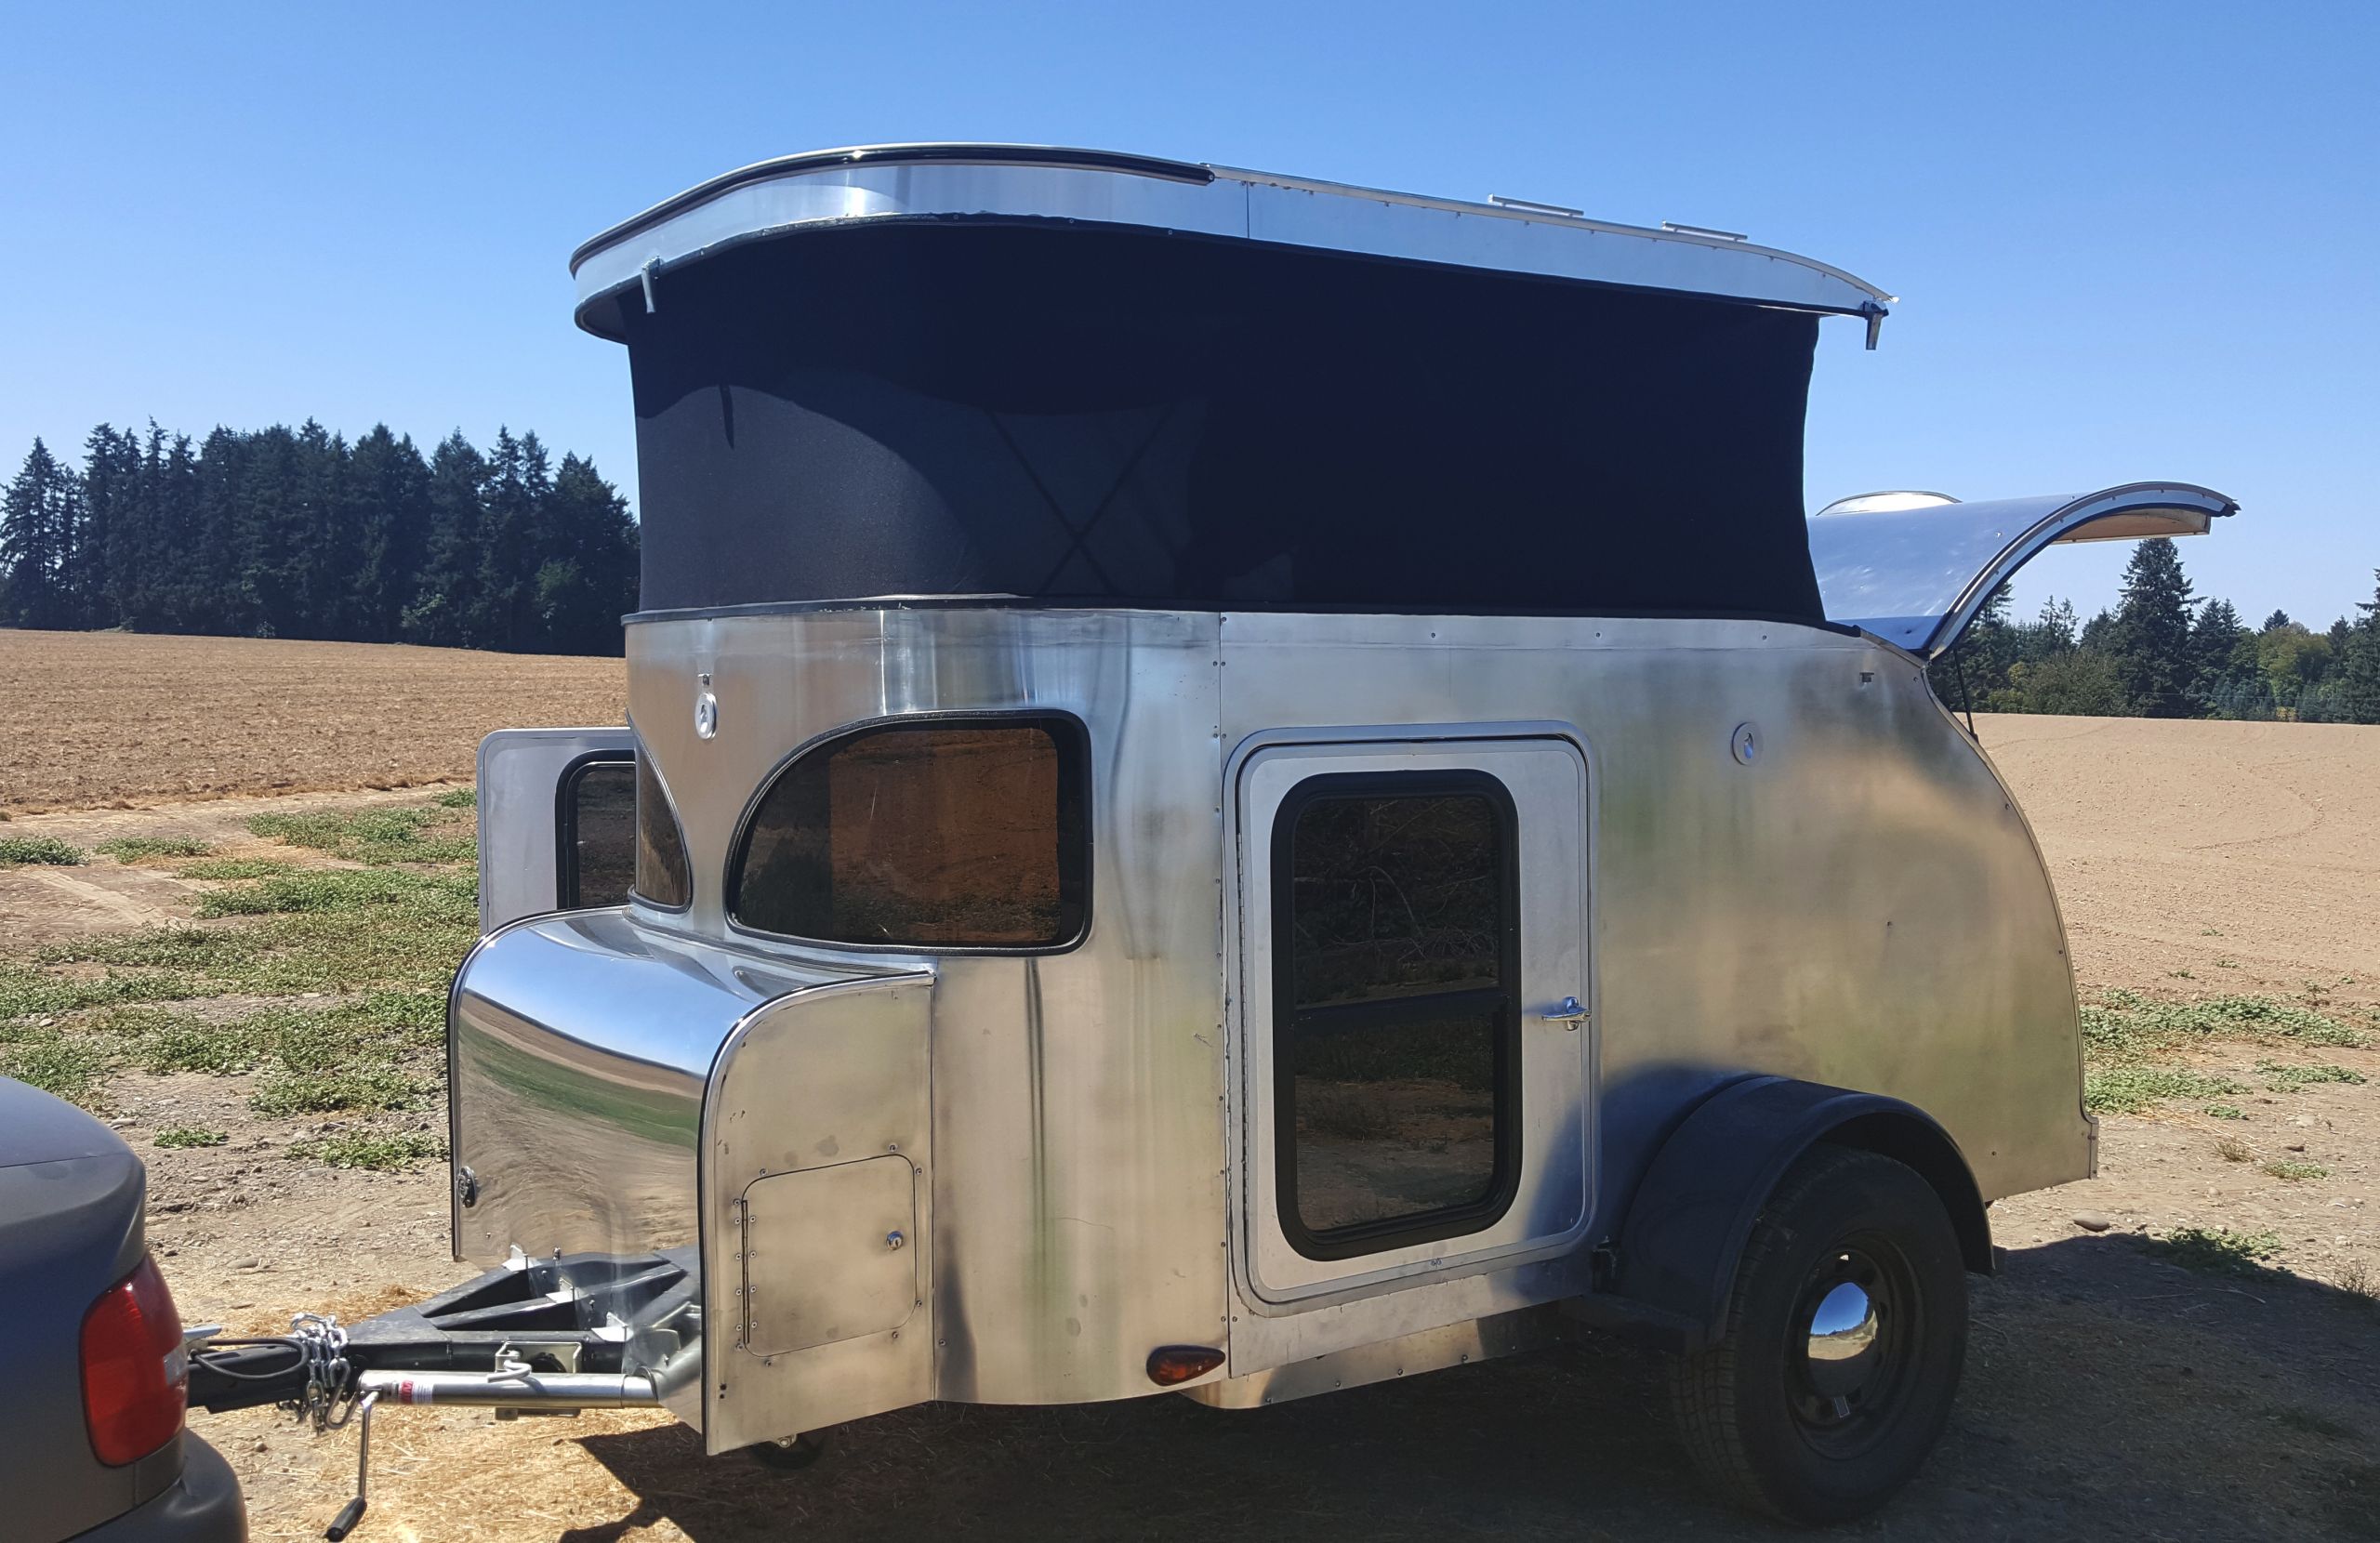 DIY Trailers Plans
 DIY Teardrop Trailer Better Than Any Bug Out Bag